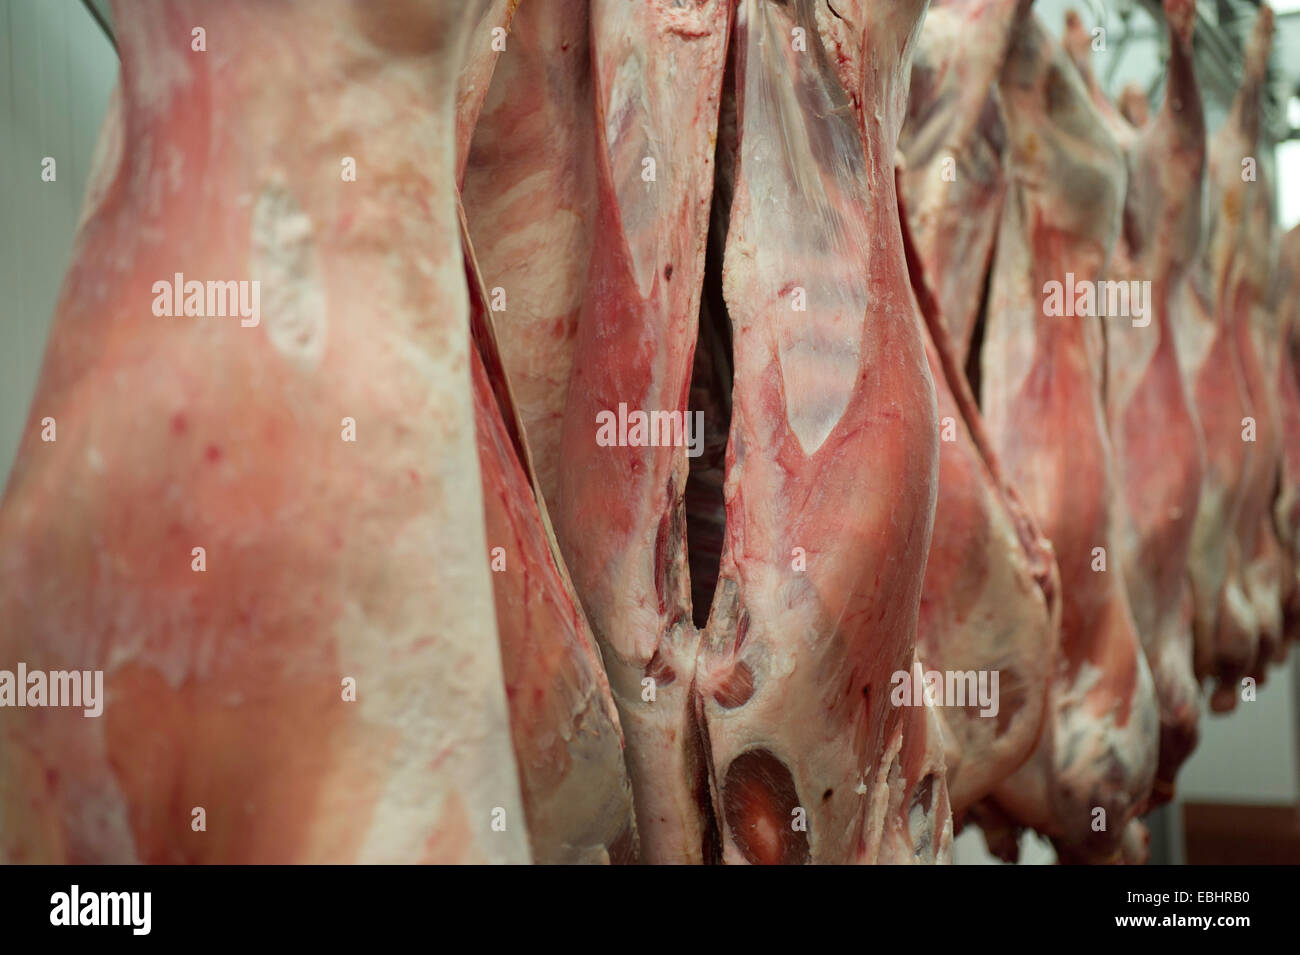 Pork pig carcasses hanging on meat hooks in a factory Stock Photo - Alamy